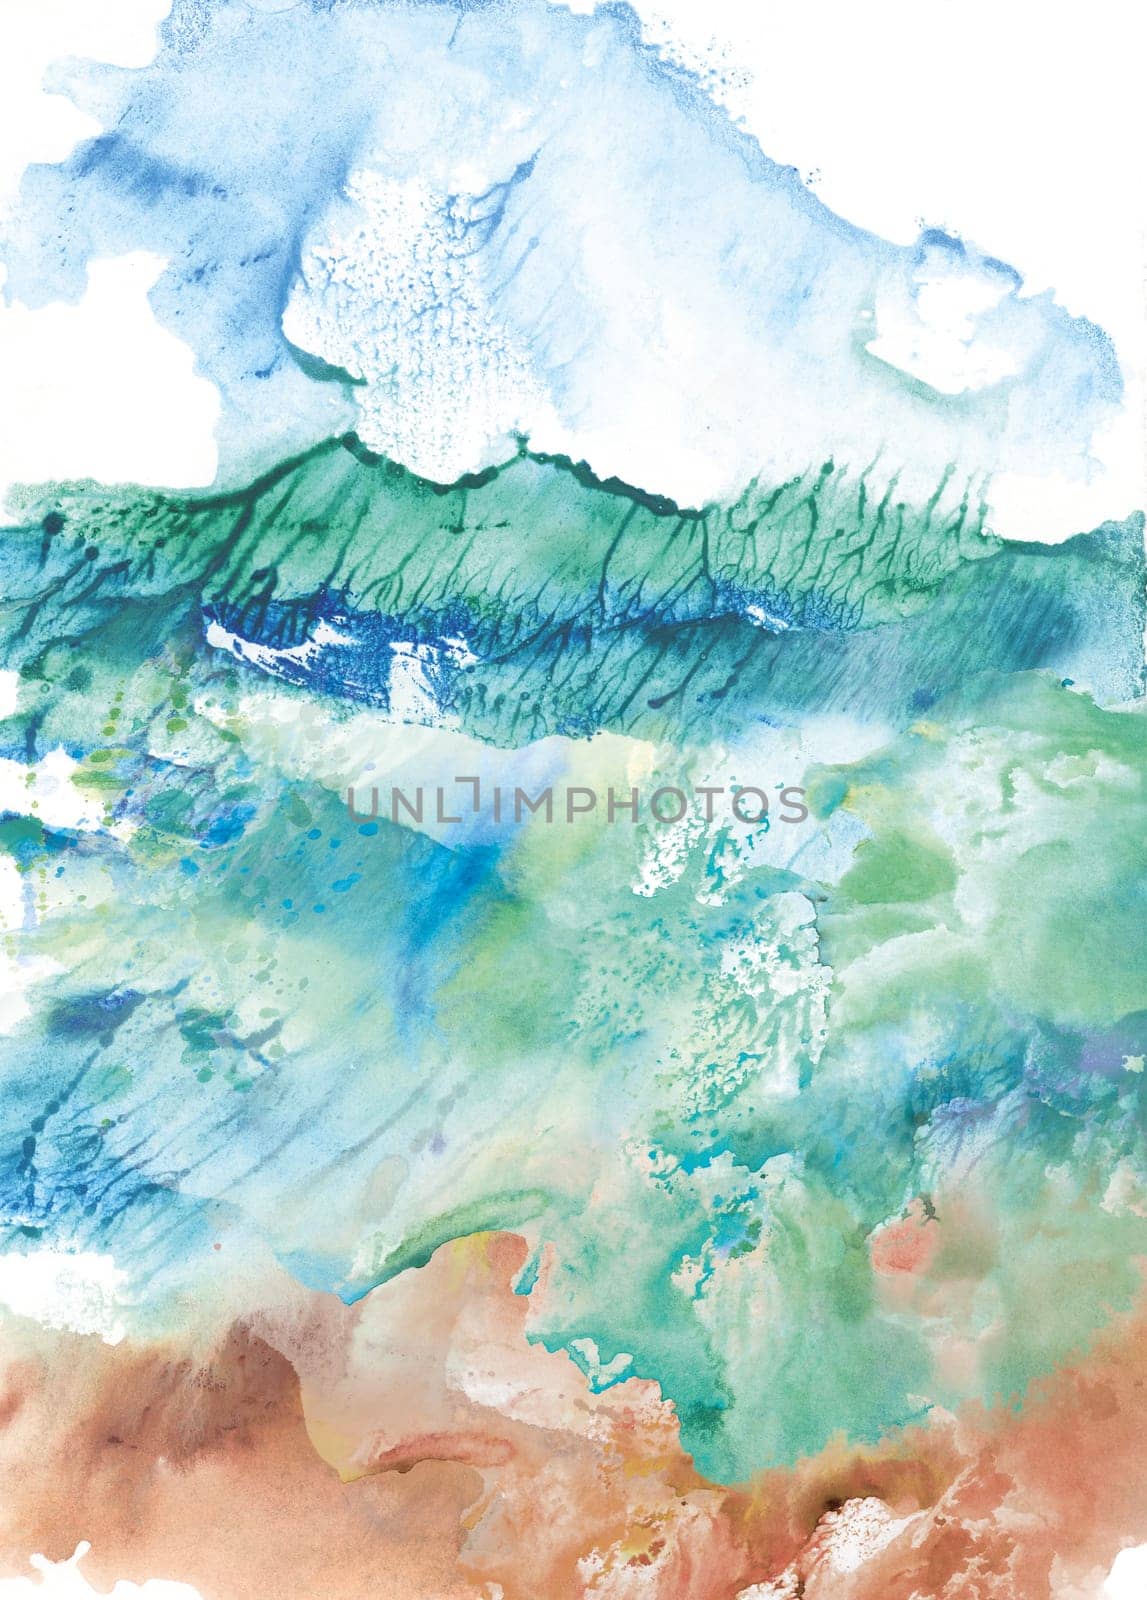 Background sea from Monotype paints and gradients with multi-colored blots abstract landscape isolated on white